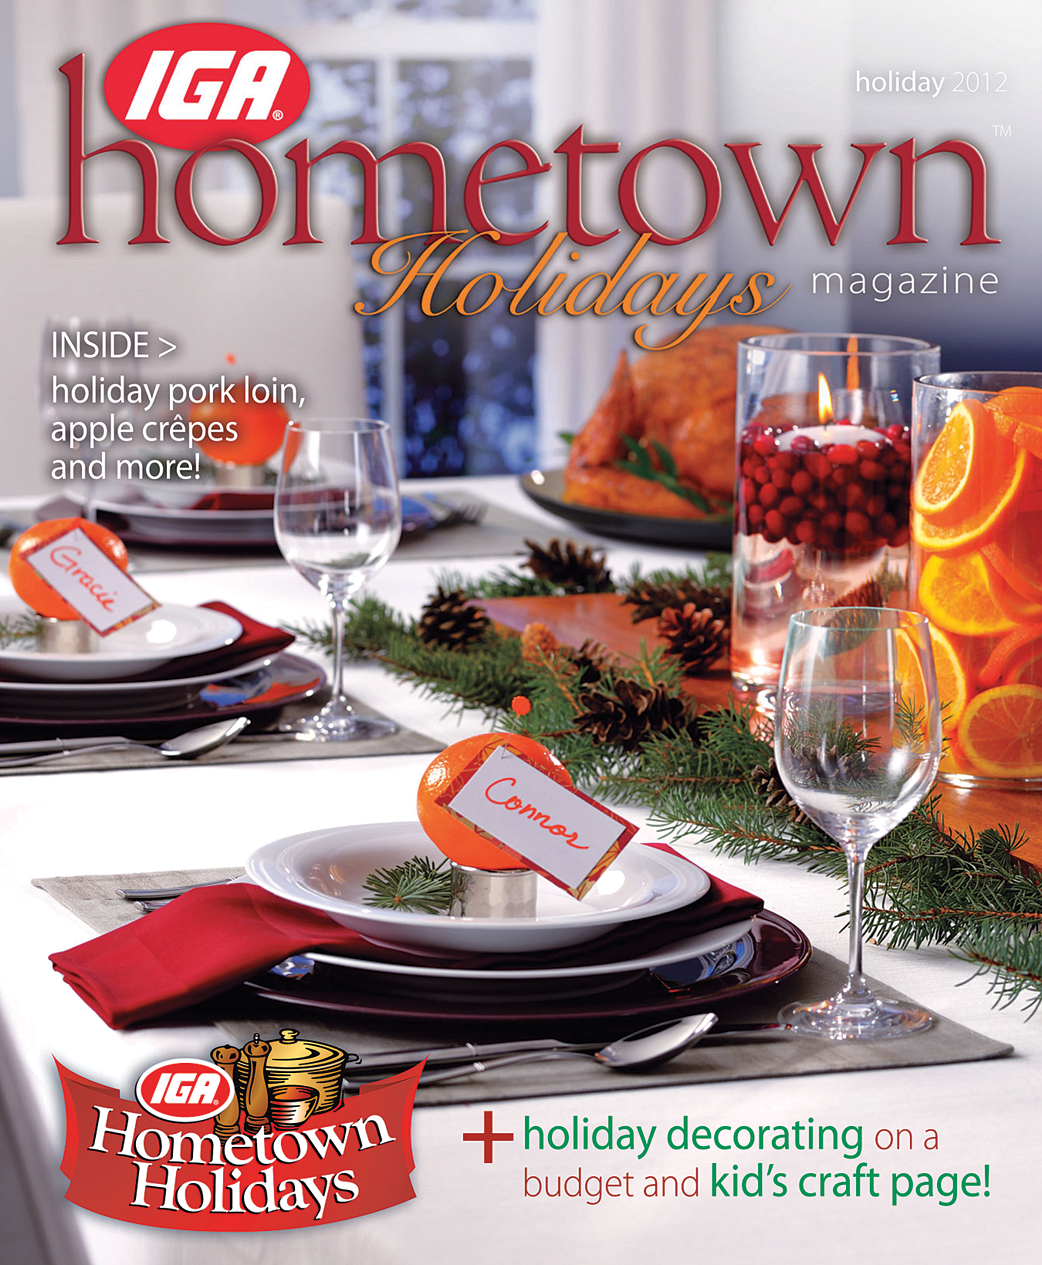 IGA is integrating print promotional materials like its Hometown Holidays magazine with its digital efforts.